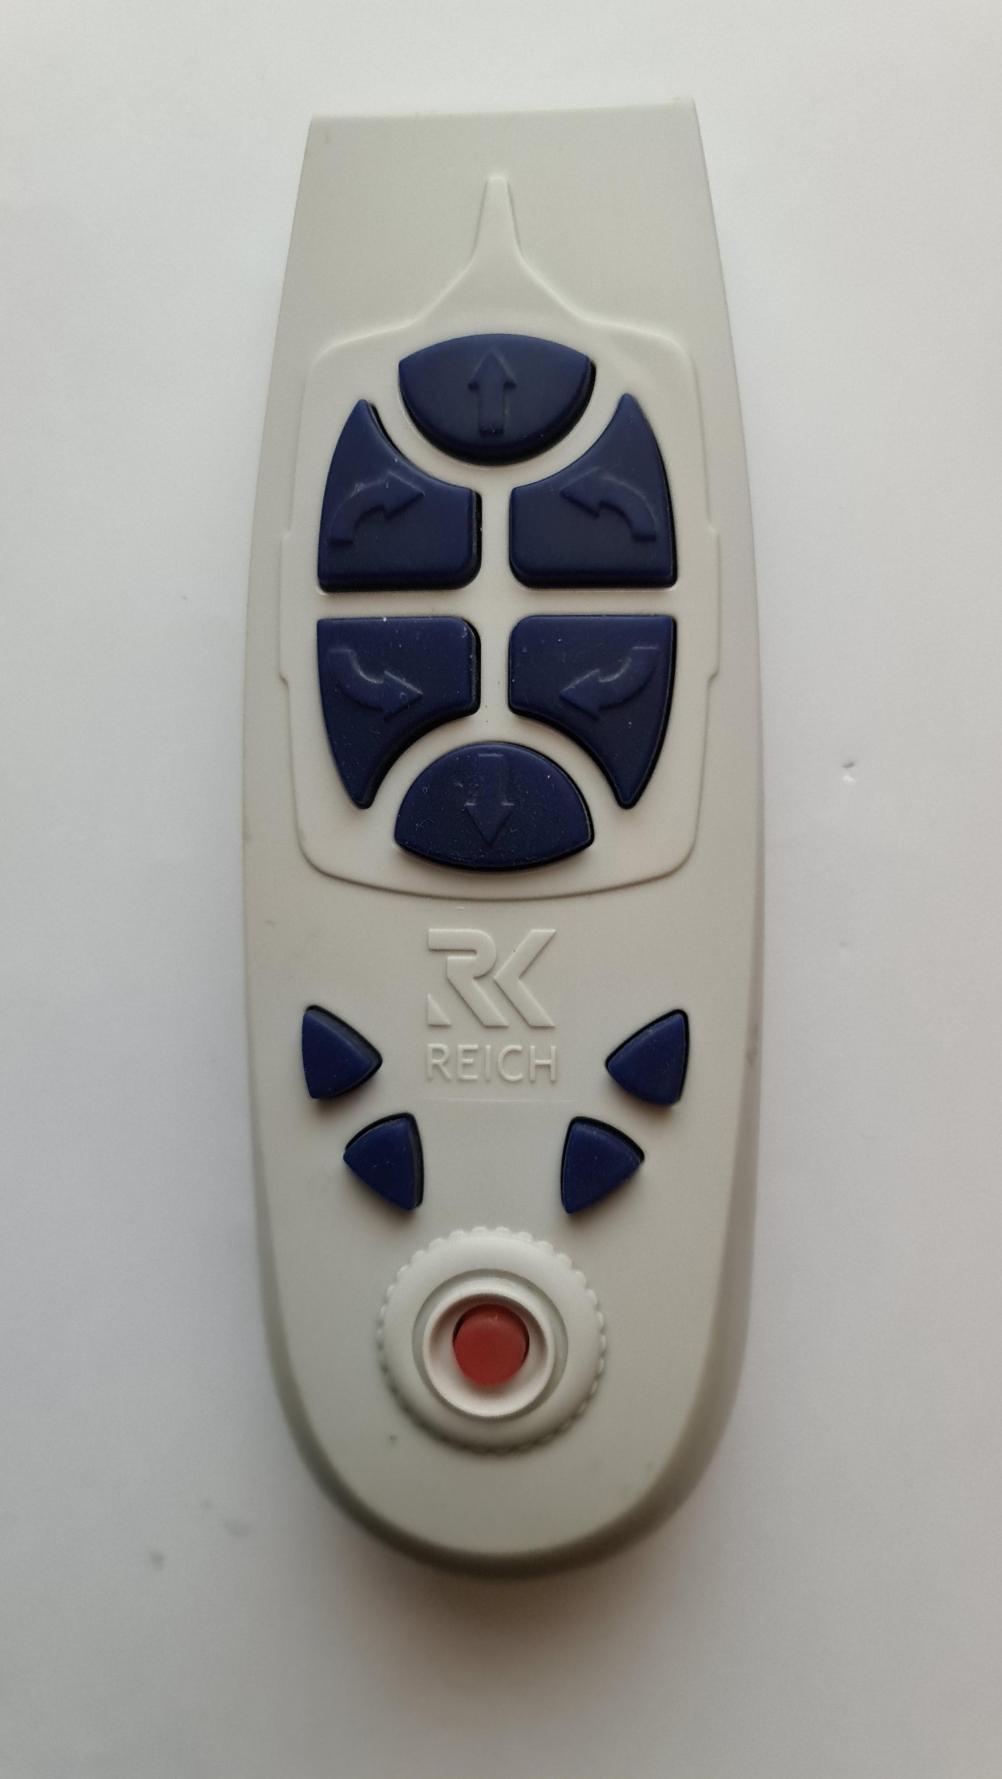 Reich  527-0510 Remote Control - Front Image